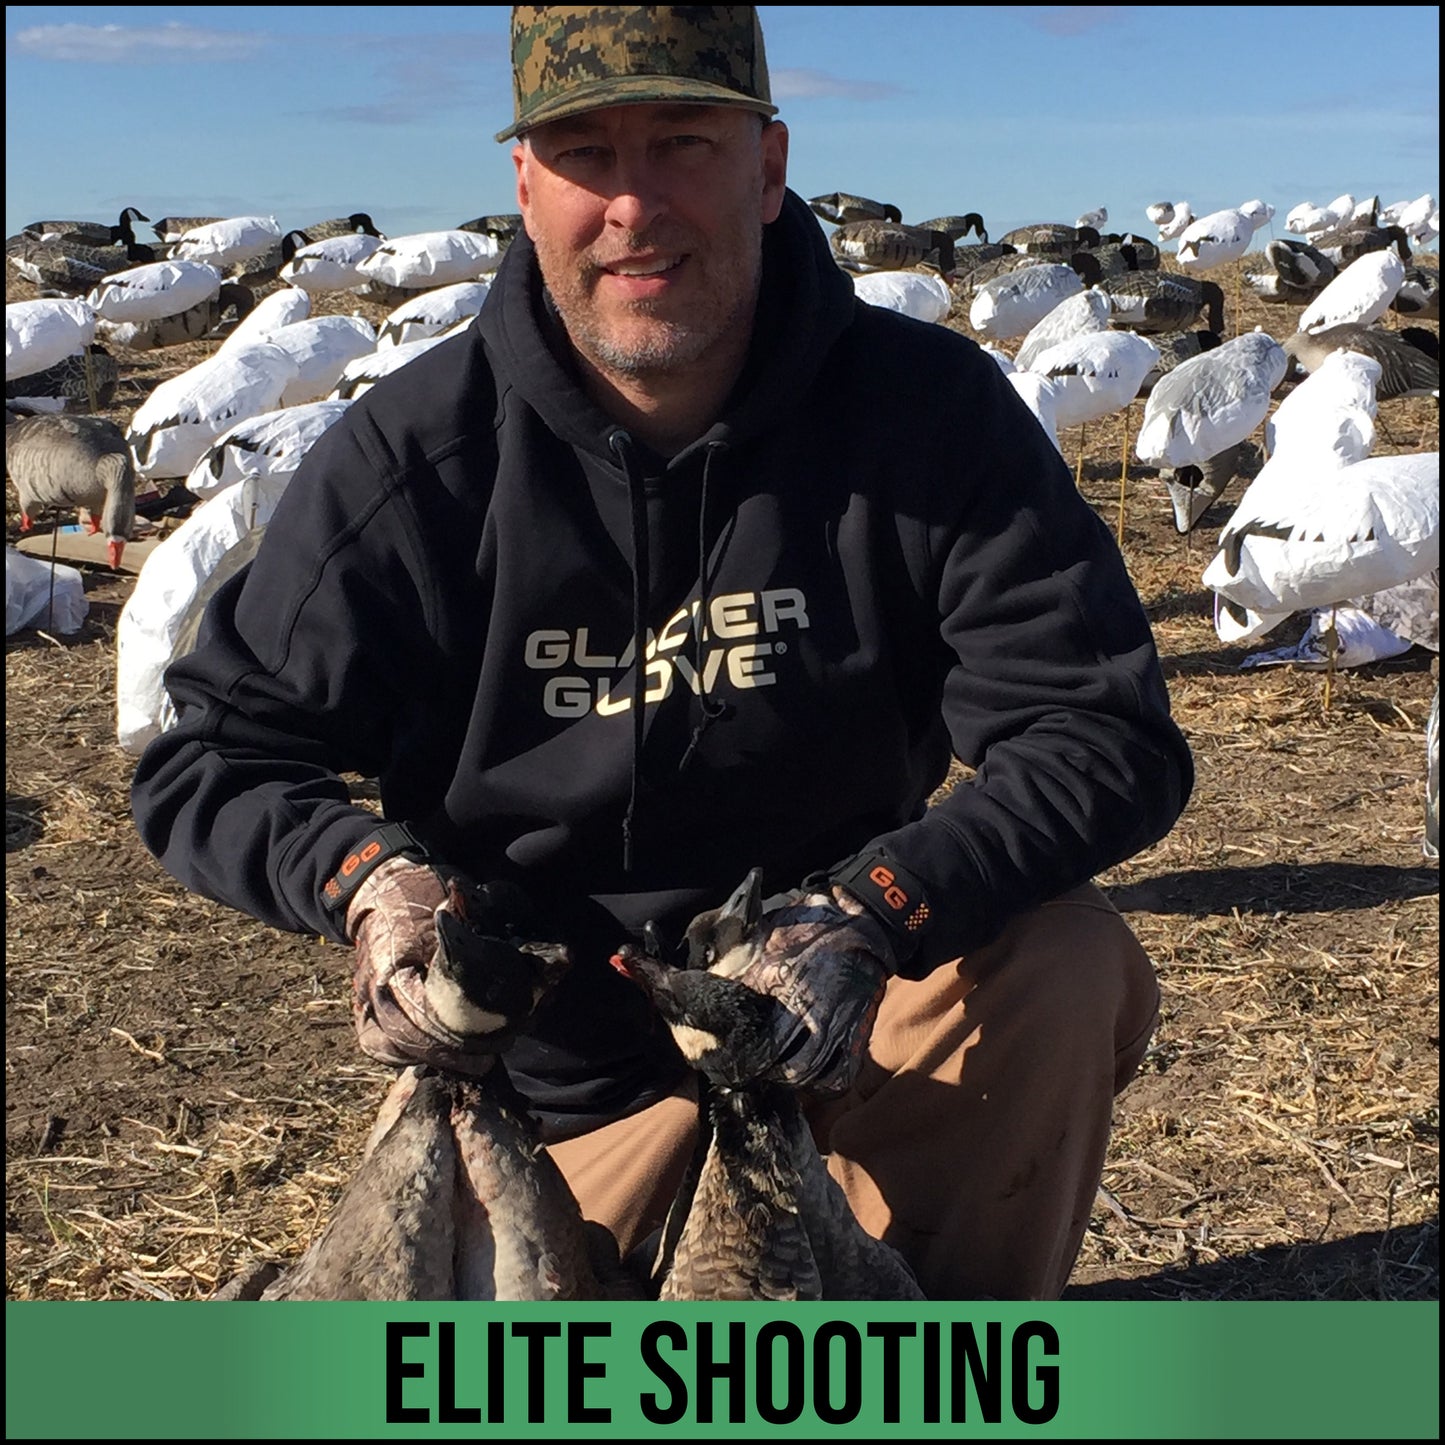 The Elite Shooting glove is designed to keep your hands warm and protected while providing great dexterity for any of your hunting adventures.